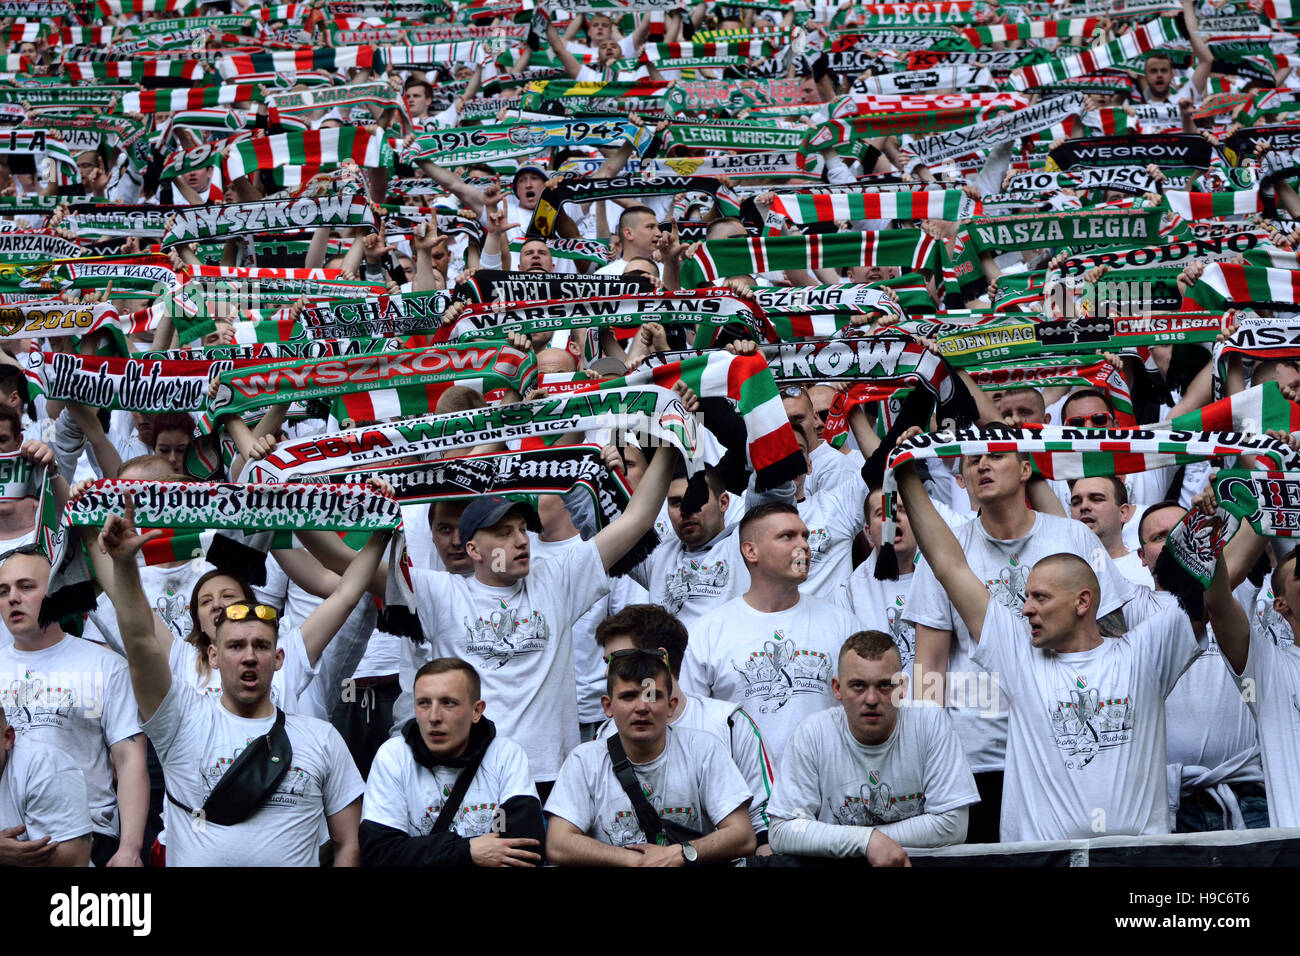 Legia Warsaw fans holding fan scarves at PGE Narodowy stadium in Warsaw Stock Photo